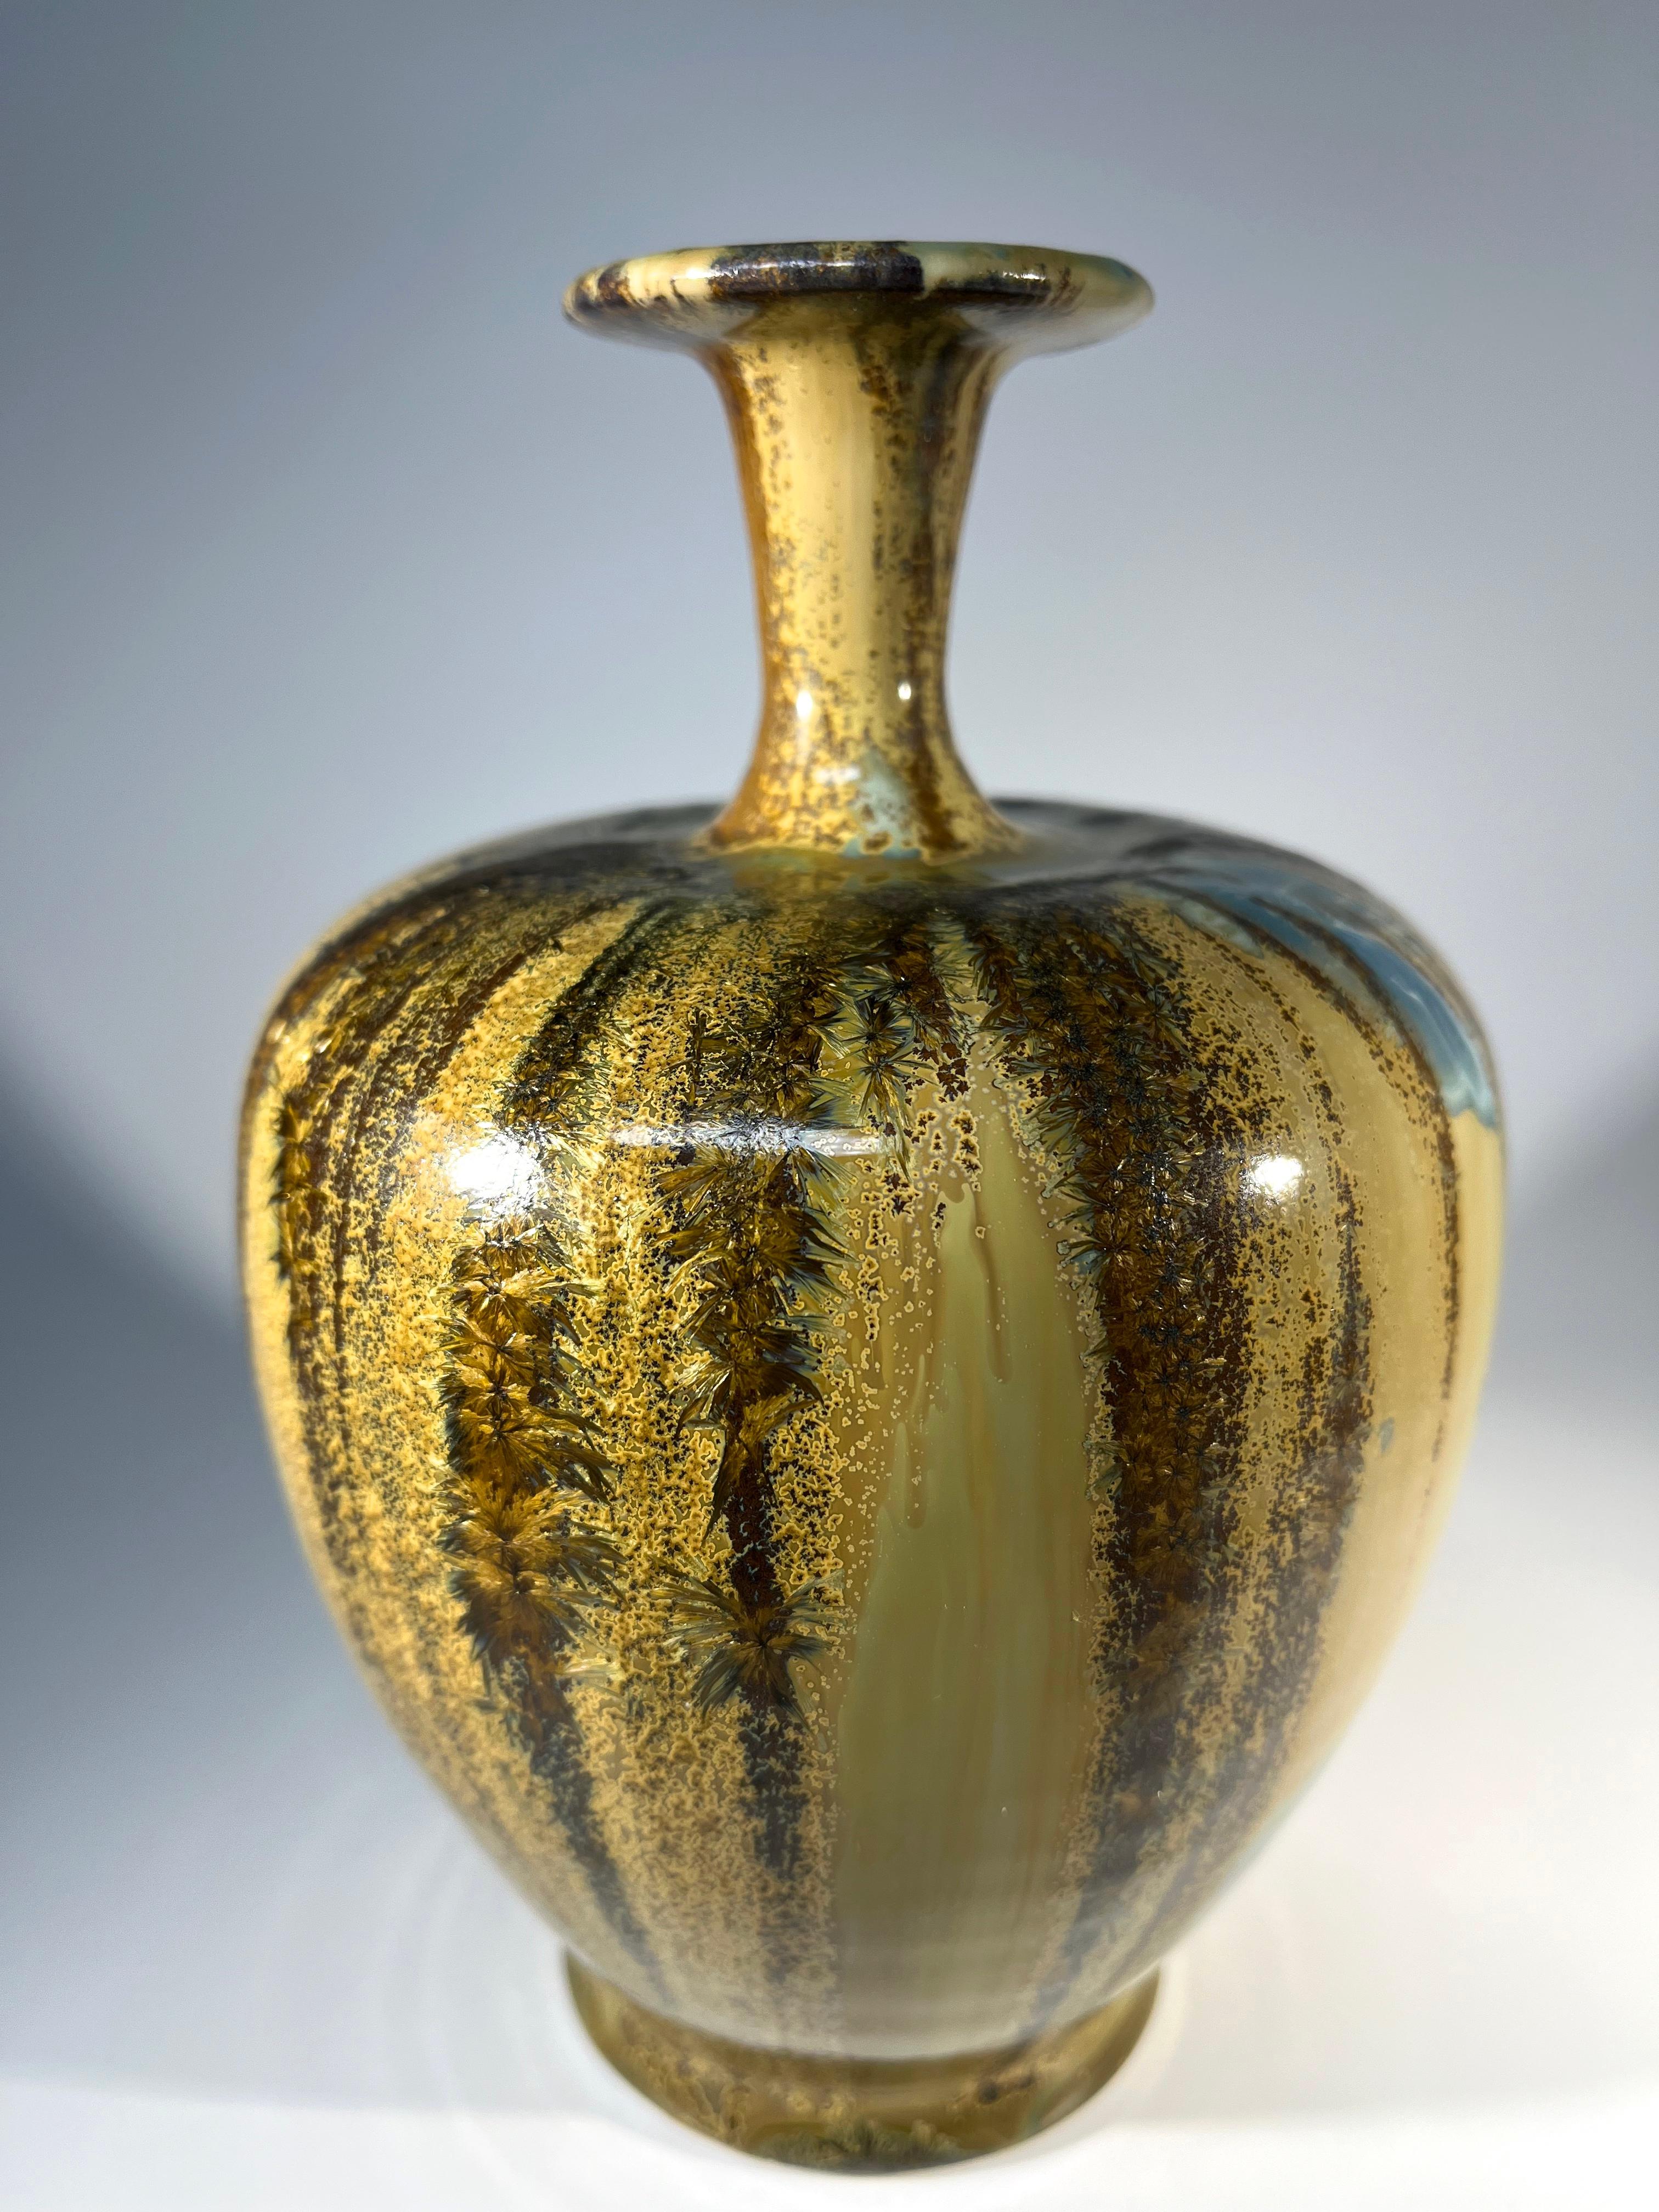 Ceramic Impeccable Crystalline Glaze Studio Pottery Vase By Maurice Young Sussex England For Sale